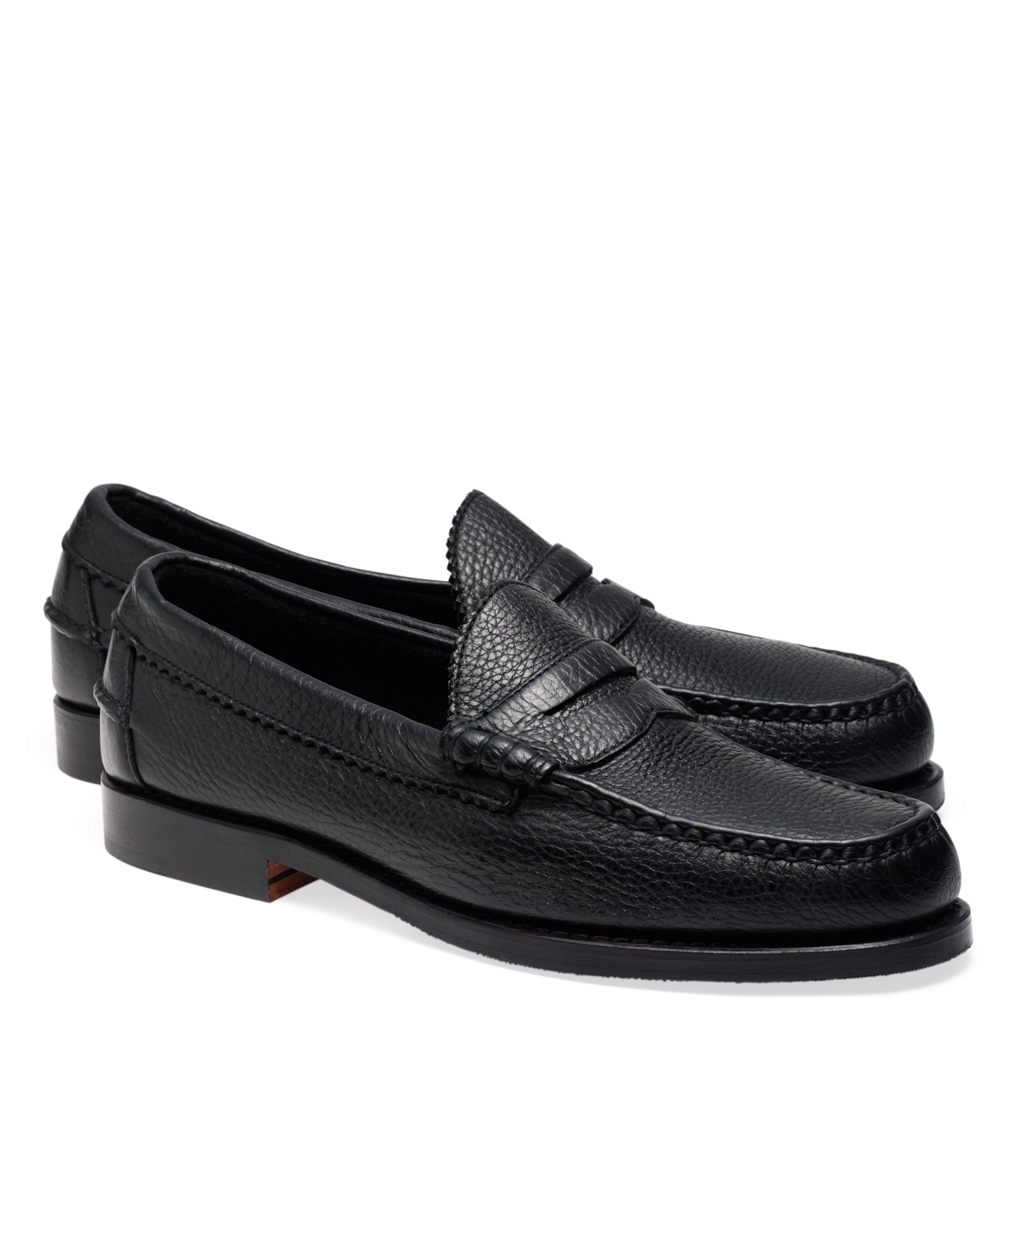 Brooks Brothers Allen Edmonds Beef Roll Pebble Penny Loafers In Black For Men Lyst